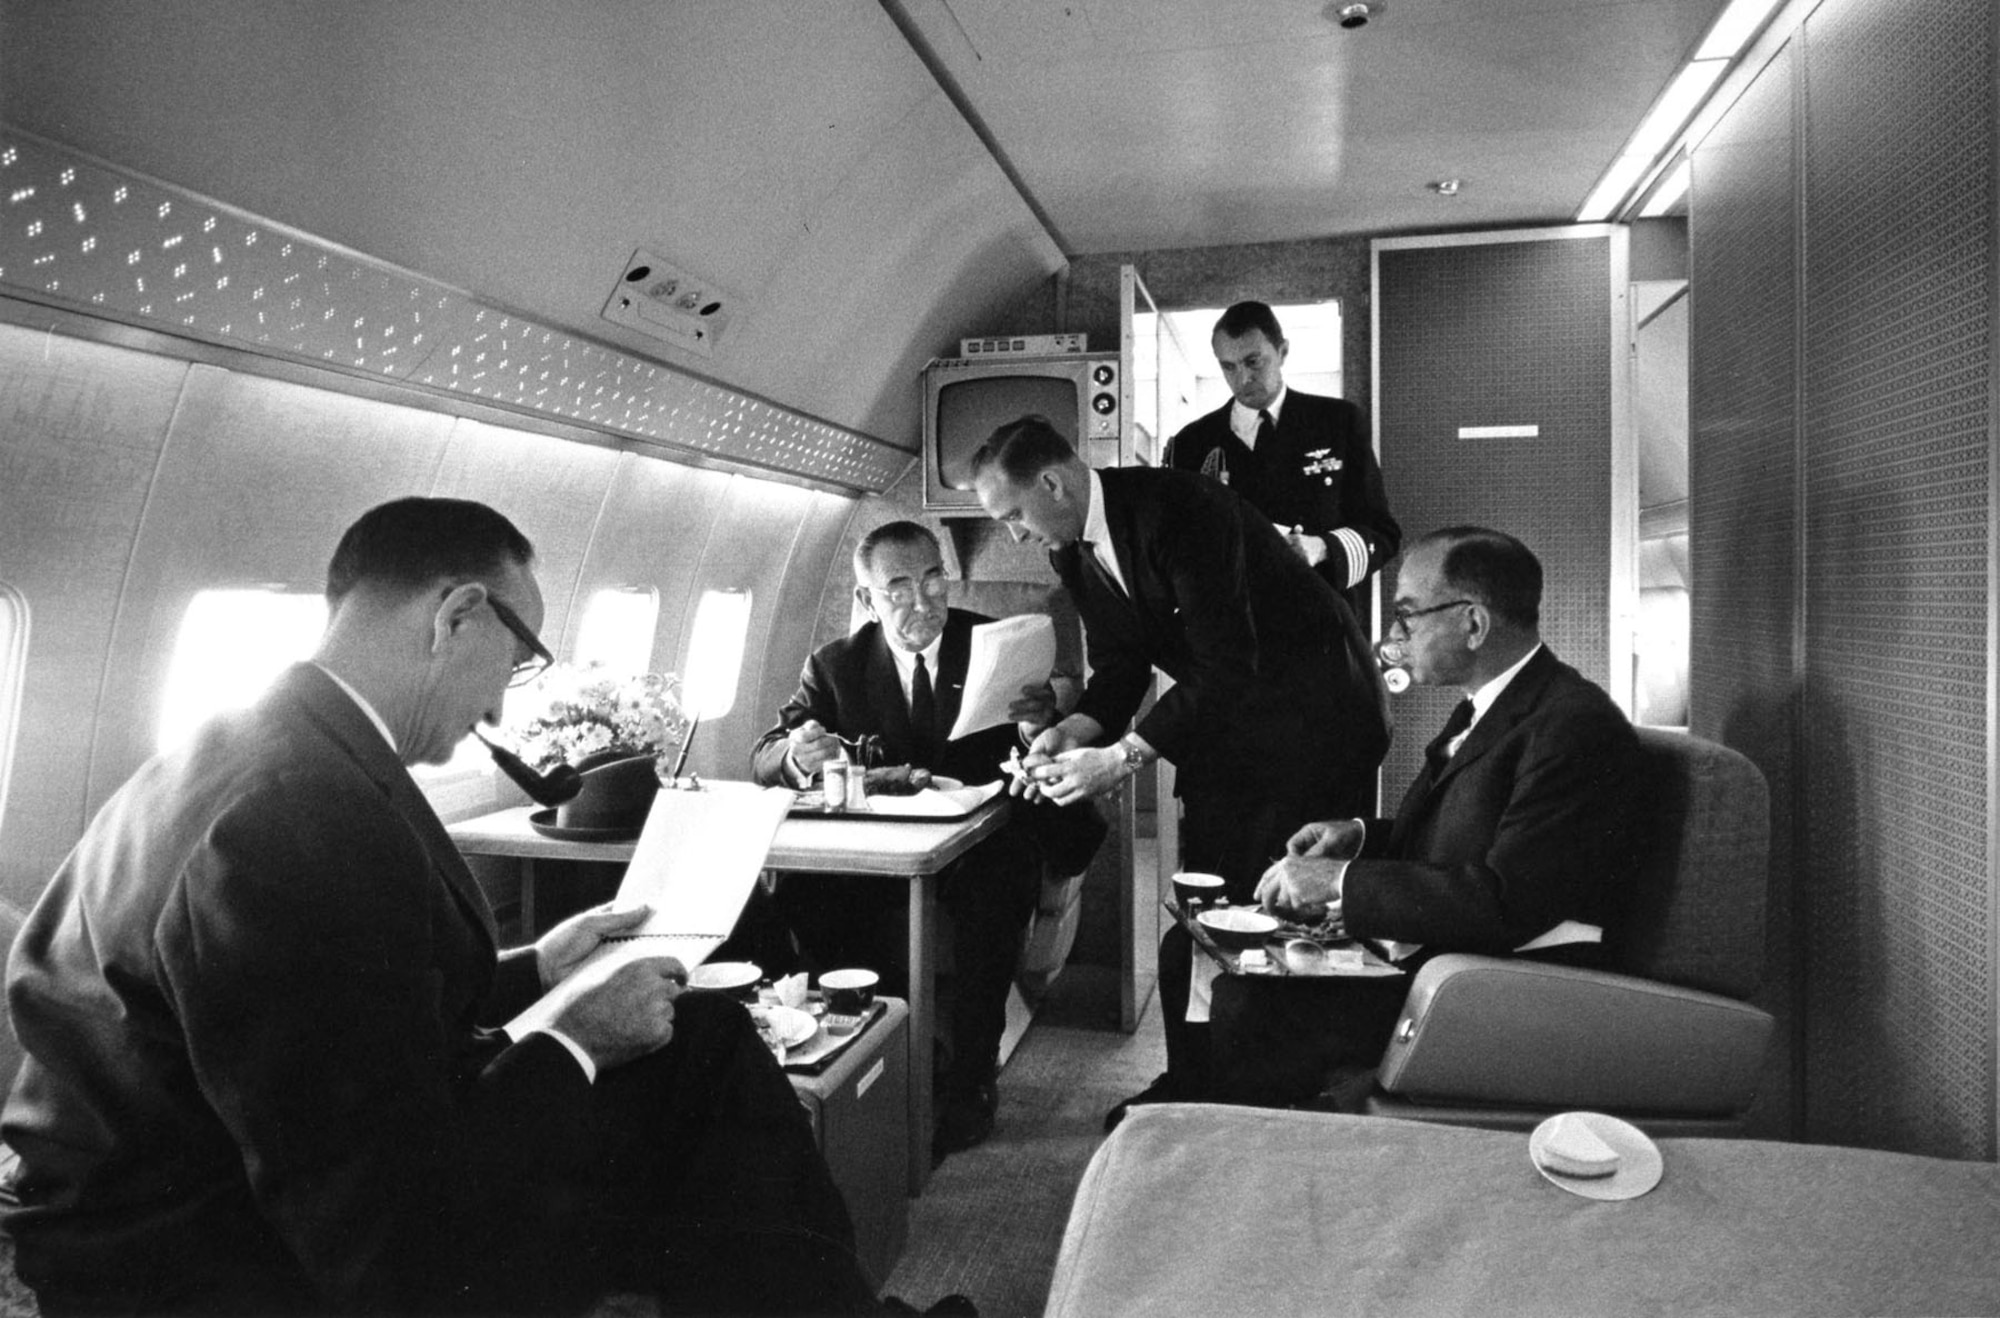 President Lyndon B. Johnson in the presidential bedroom aboard Air Force One (SAM 26000). From left to right are Sen. Mike Mansfield; President Johnson; Chief Master Sgt. Paul Glynn, serving president; U.S. Navy Aide Capt. Beach; and Sen. Fulbright. (U.S. Air Force photo)